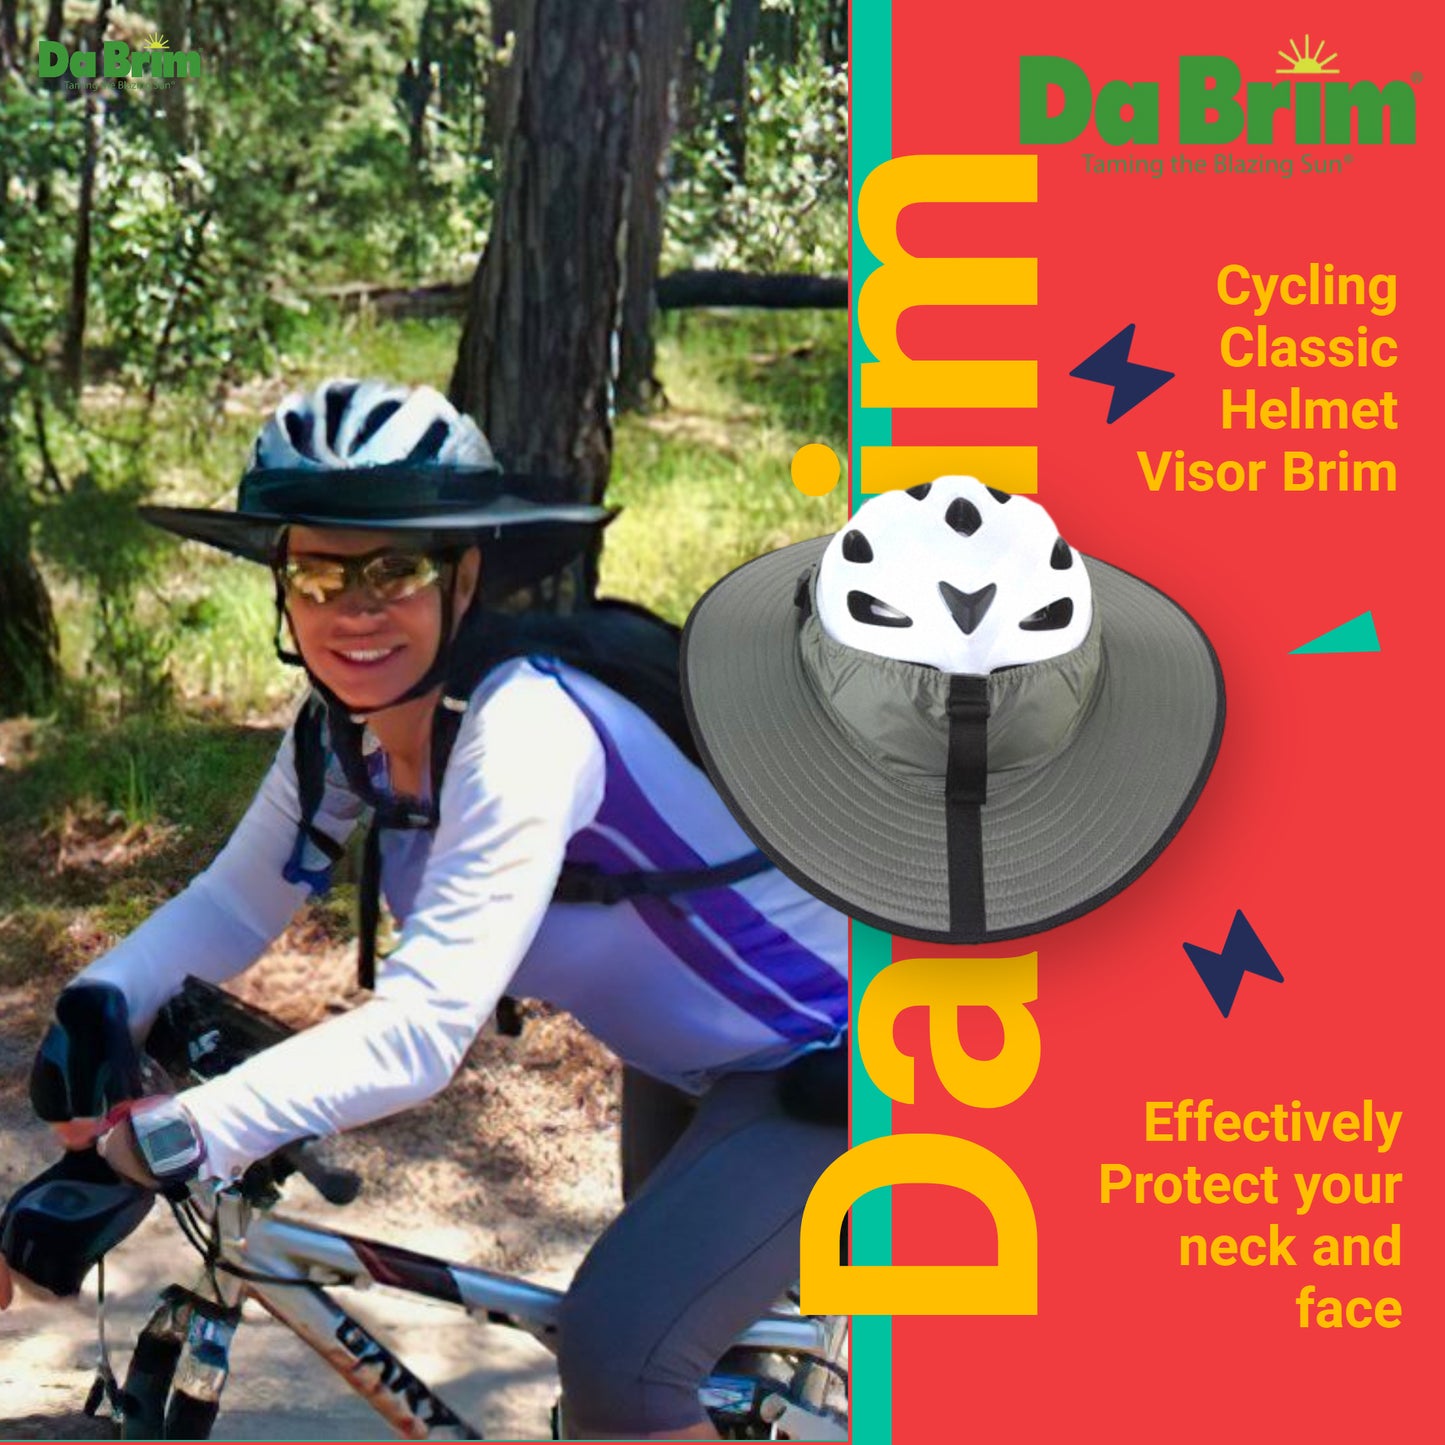 Da Brim Cycling Classic effectively protects your neck and face.